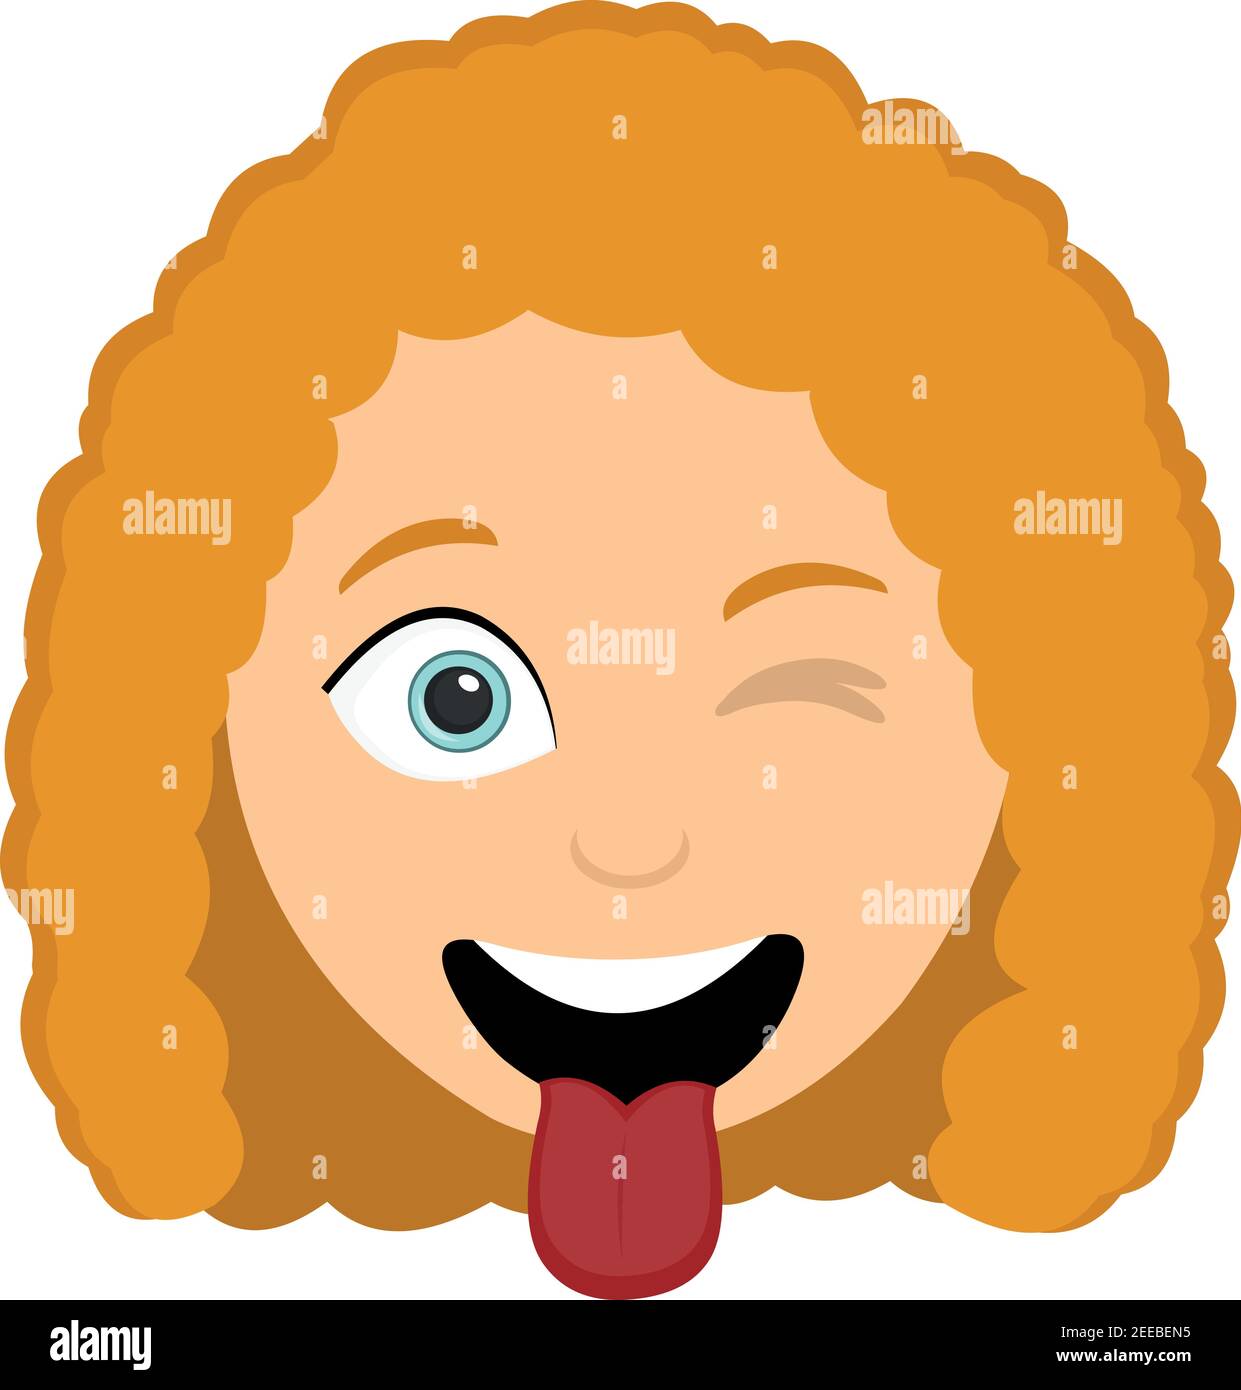 Vector emoticon illustration of a woman's head with a funny expression, with her tongue out and with a wink in one of her eyes Stock Vector